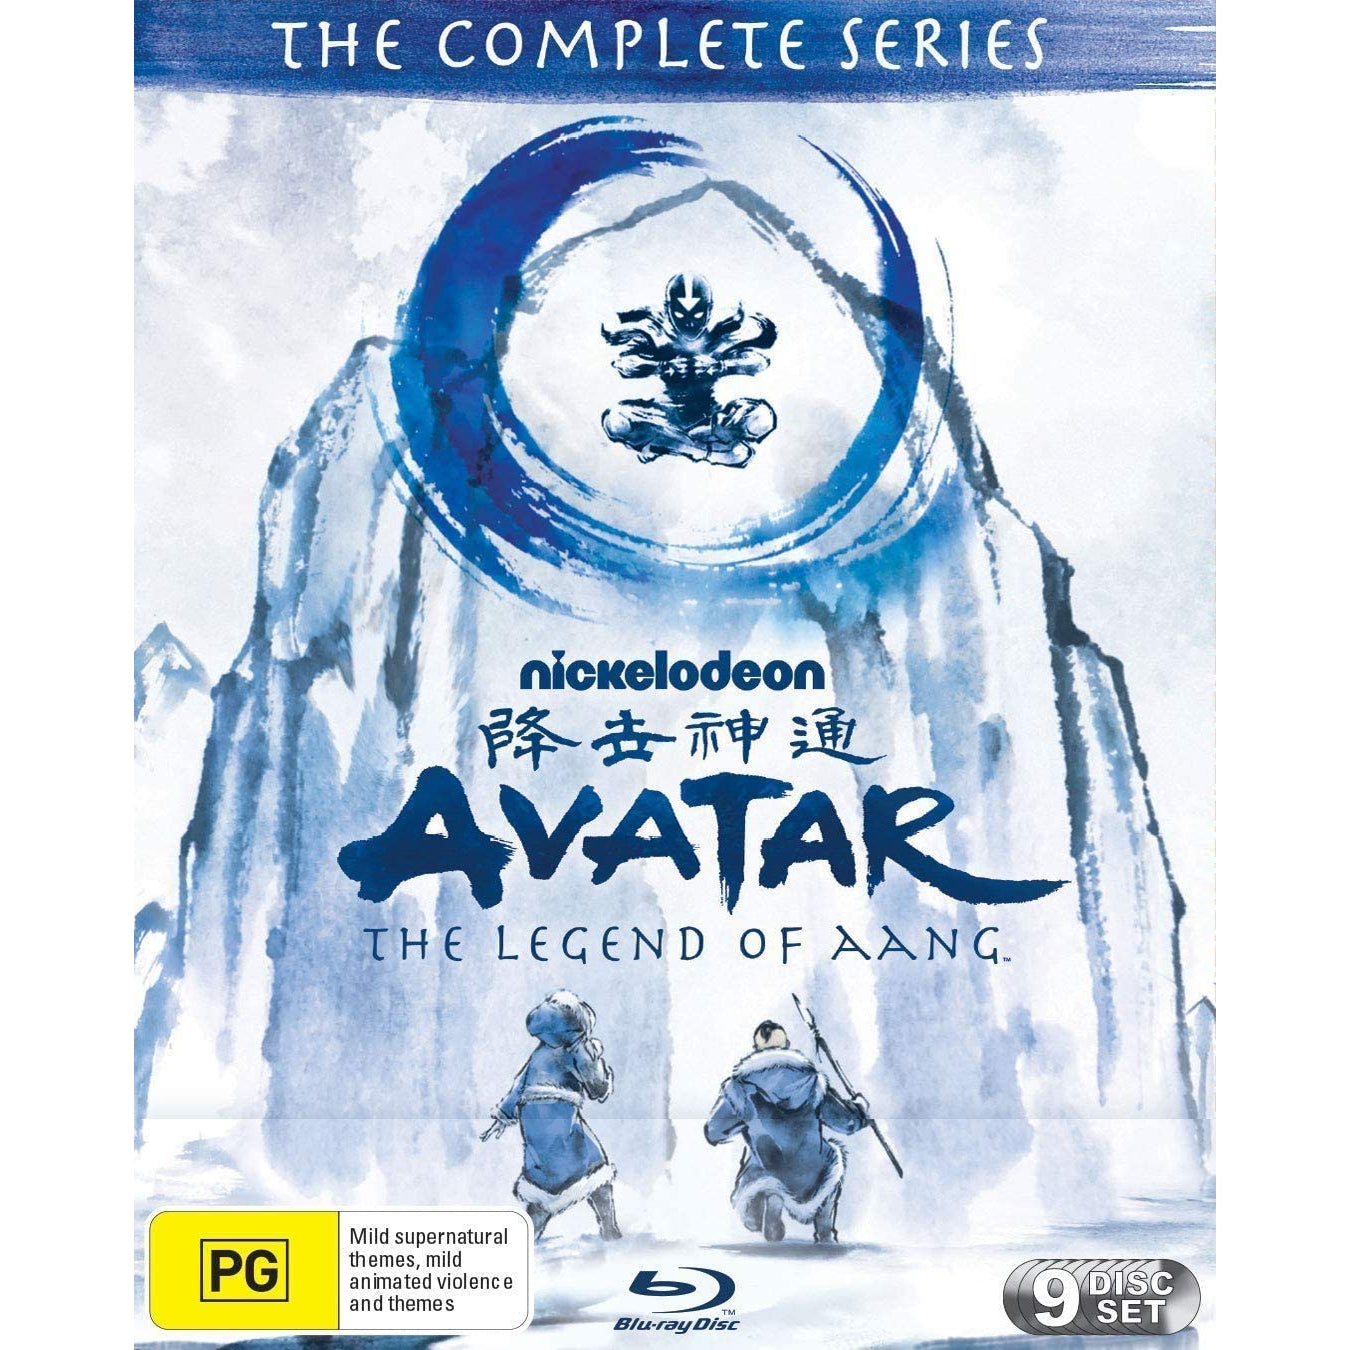 Avatar: The Legend of Aang The Complete Series - 9 Disc Set